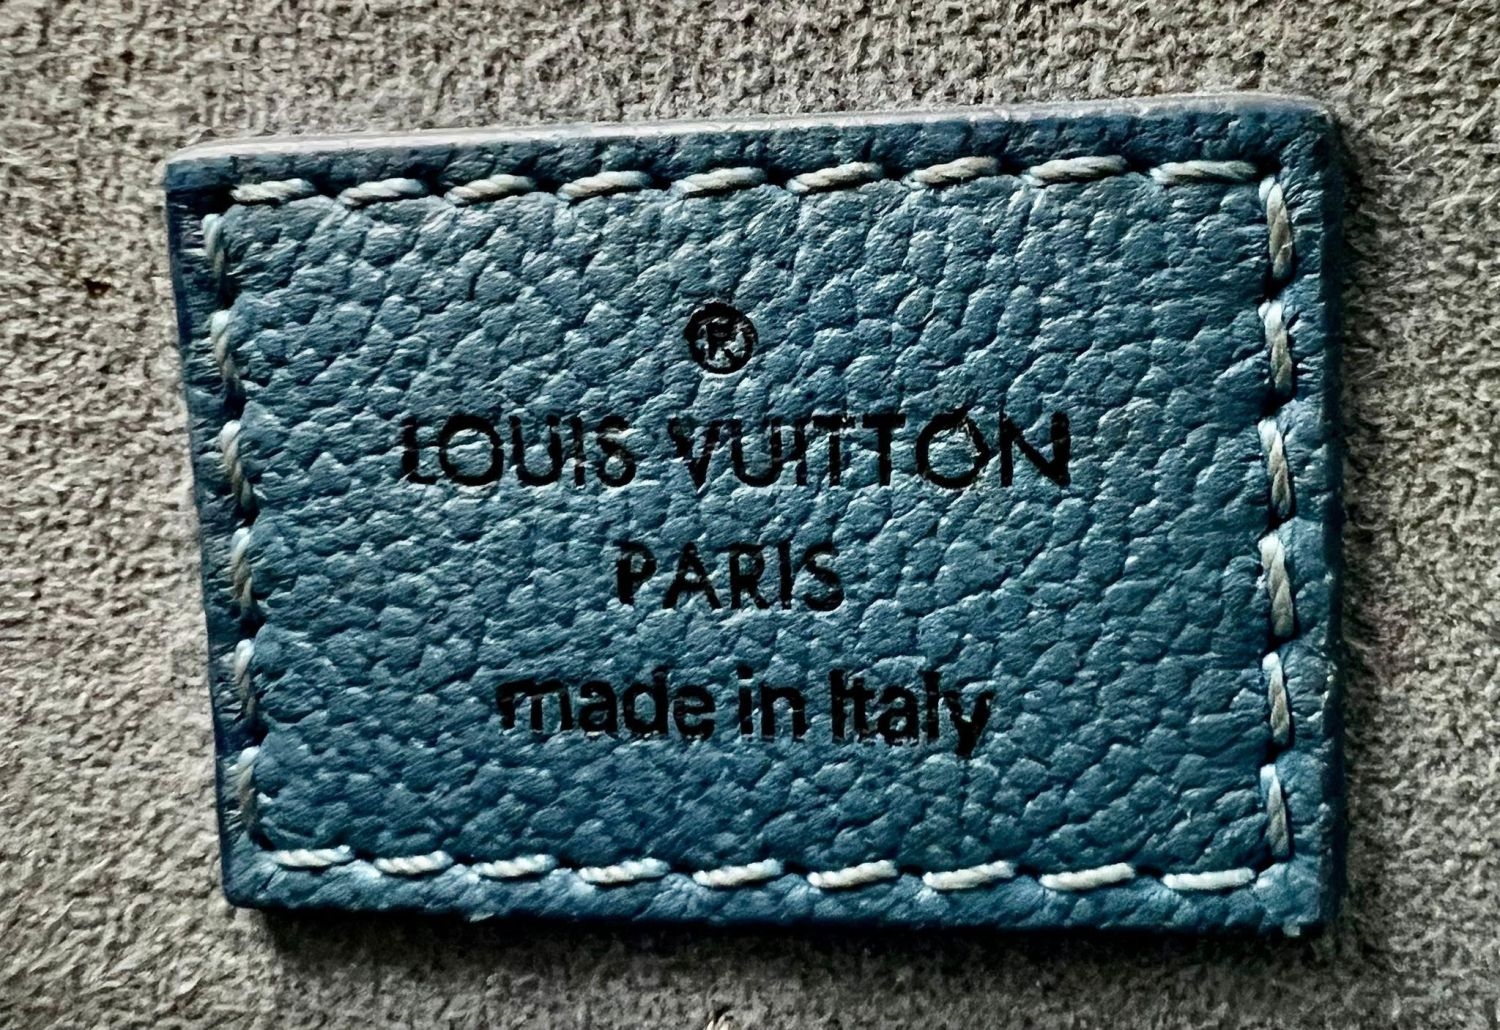 Louis Vuitton, leather border and trim (1980)